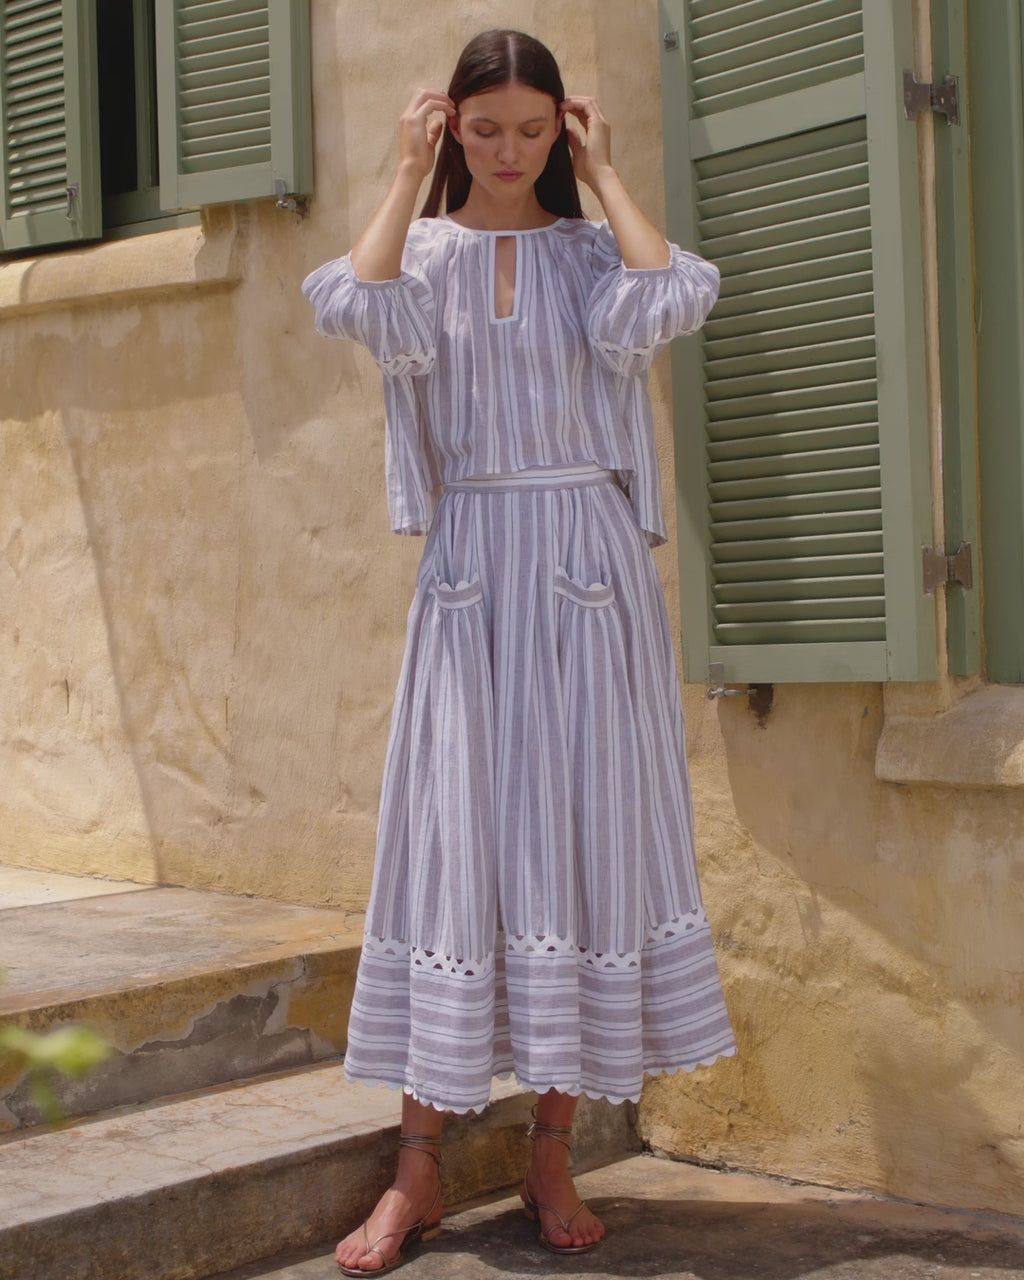 Wiggy Kit | Gaucho Skirt (Brown Stripe) | Model wearing brown and white striped maxi skirt